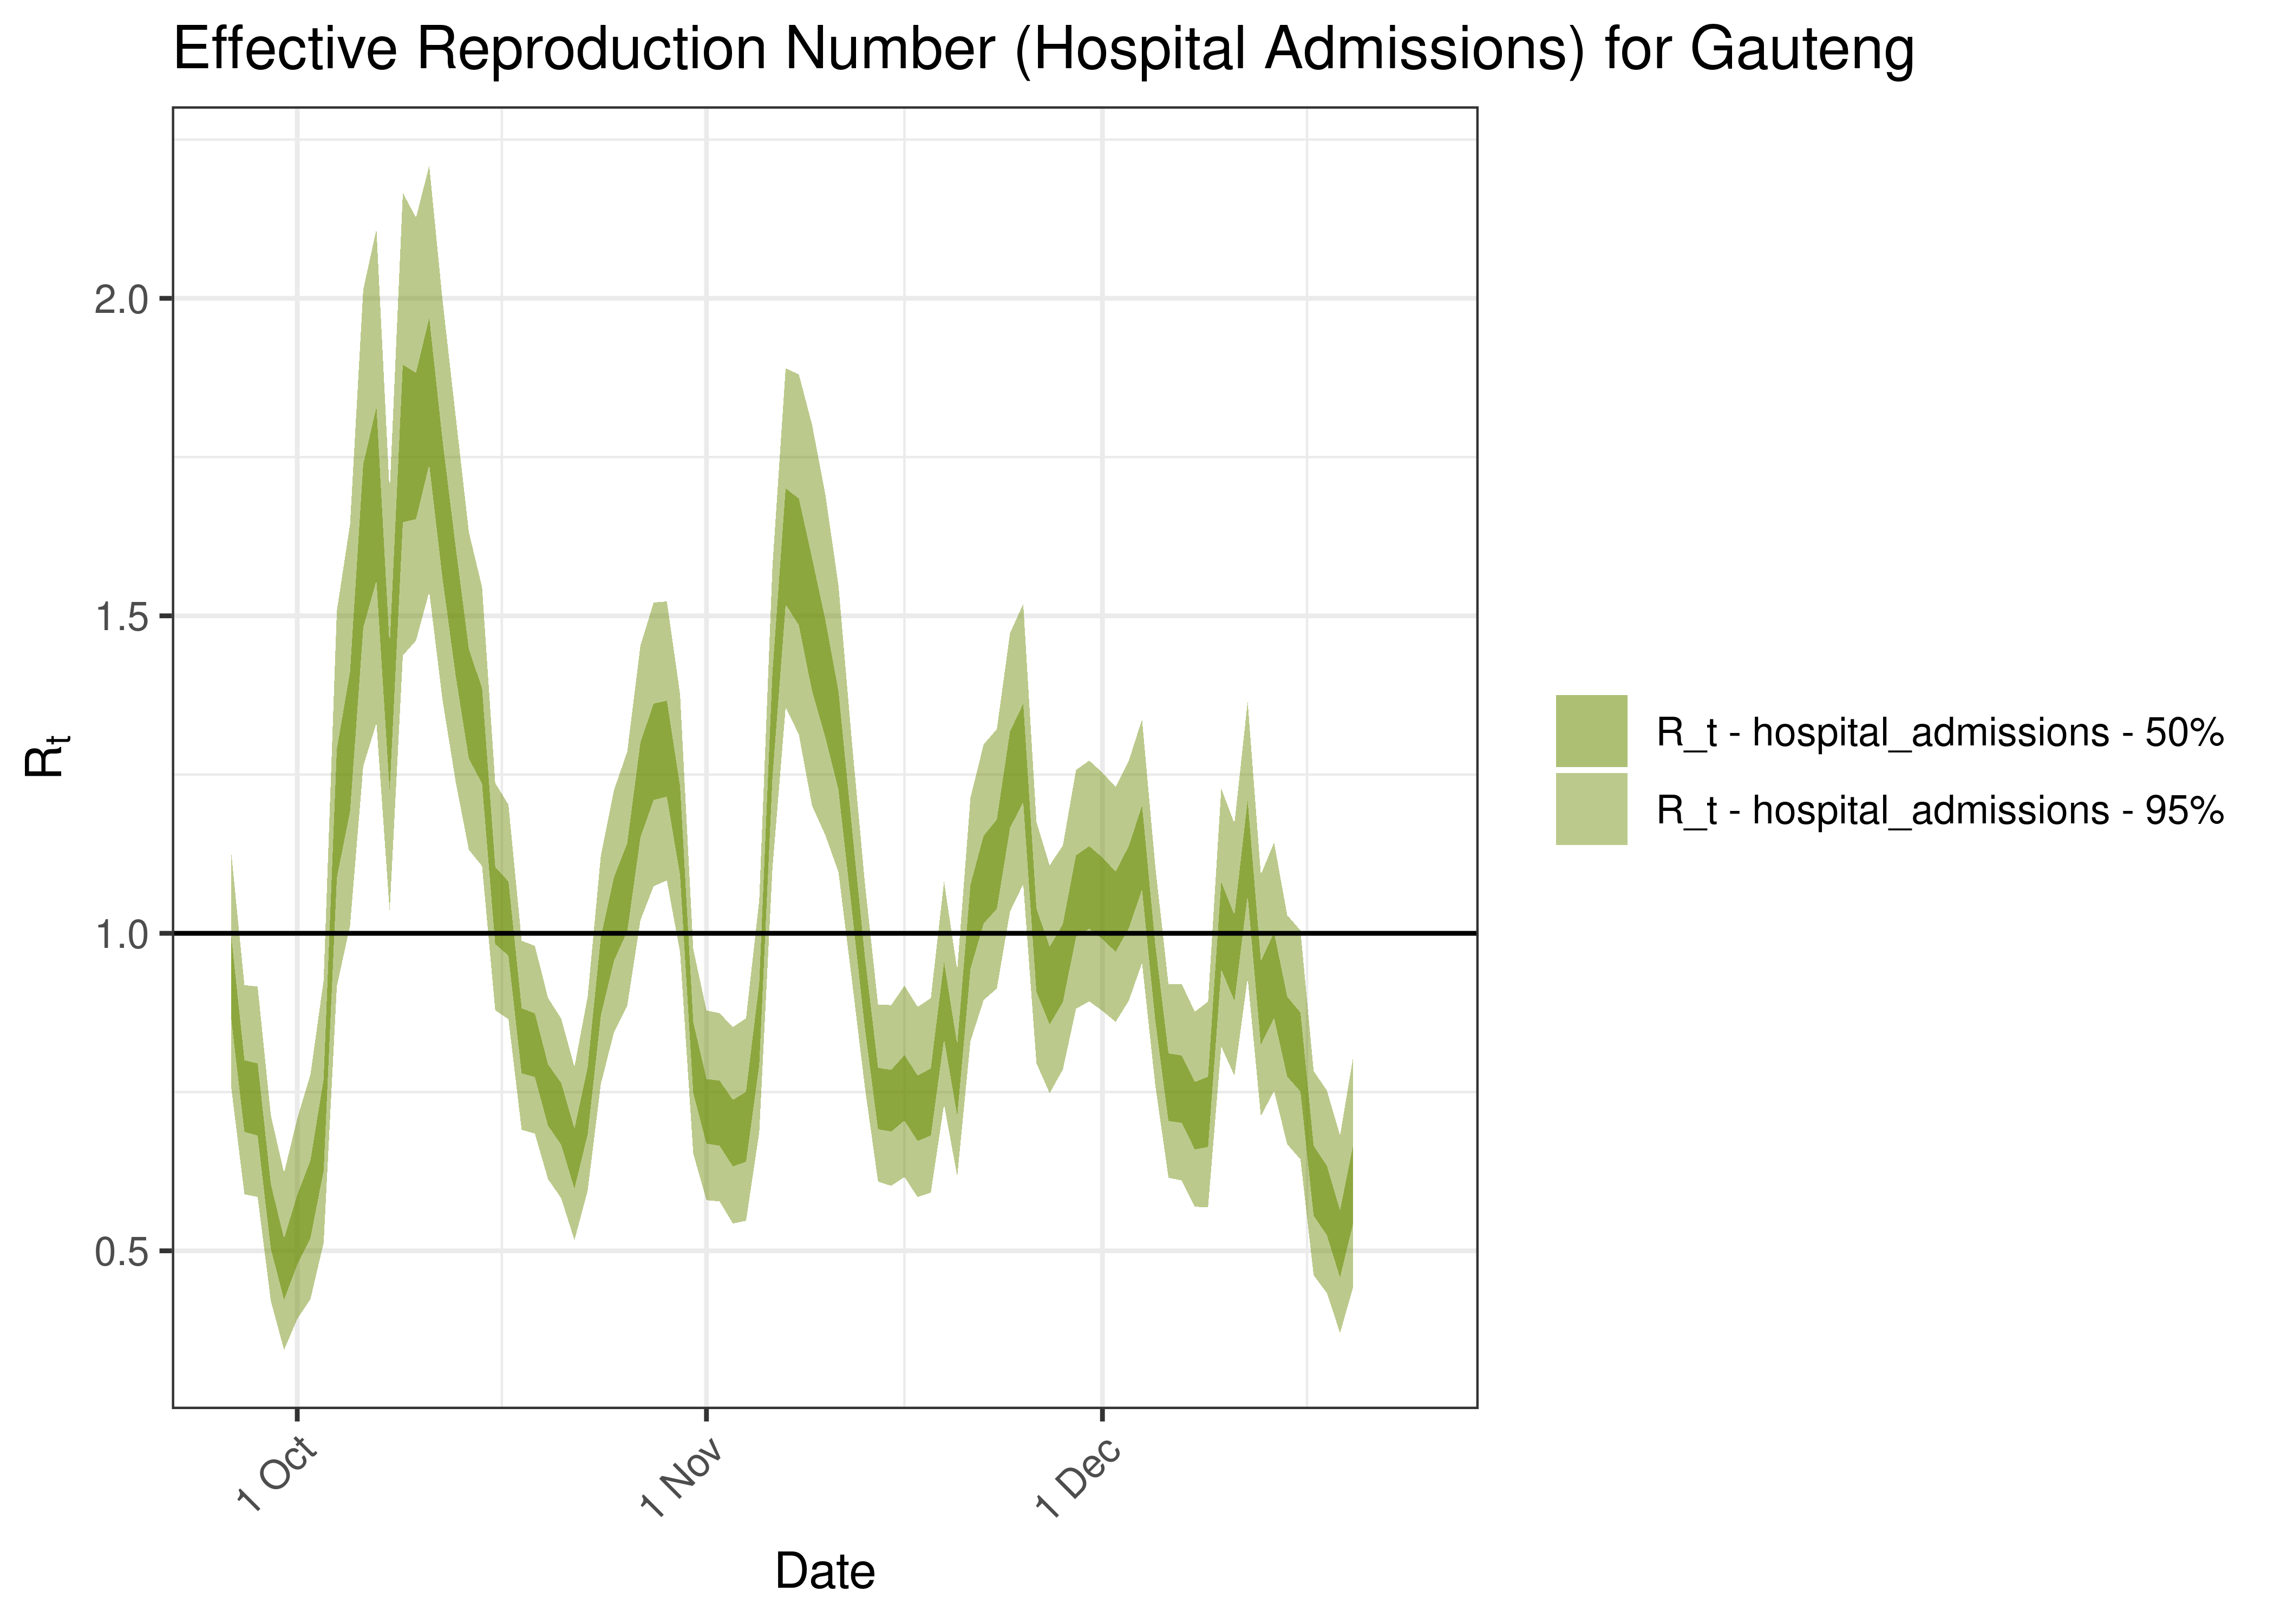 Estimated Effective Reproduction Number Based on Hospital Admissions for Gauteng over last 90 days